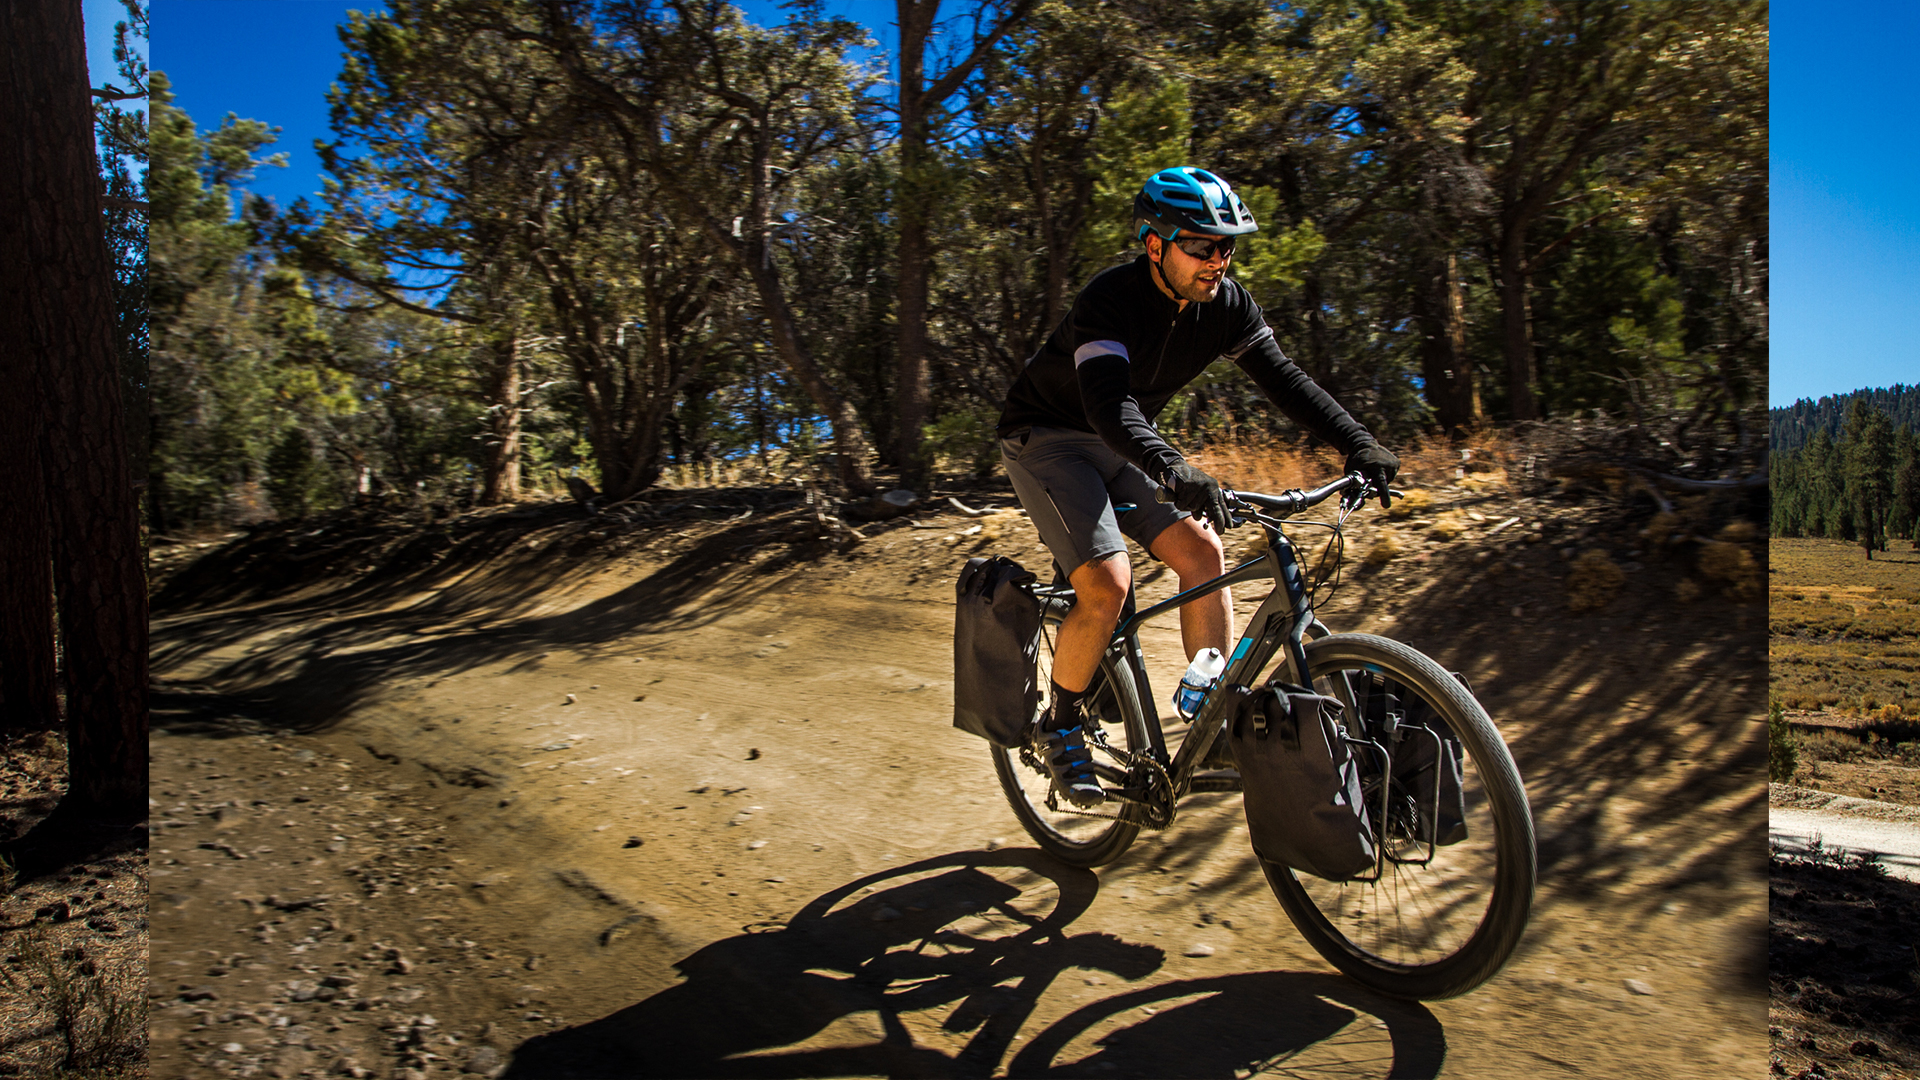 2016 Giant Bicycles, toughroad slr 1